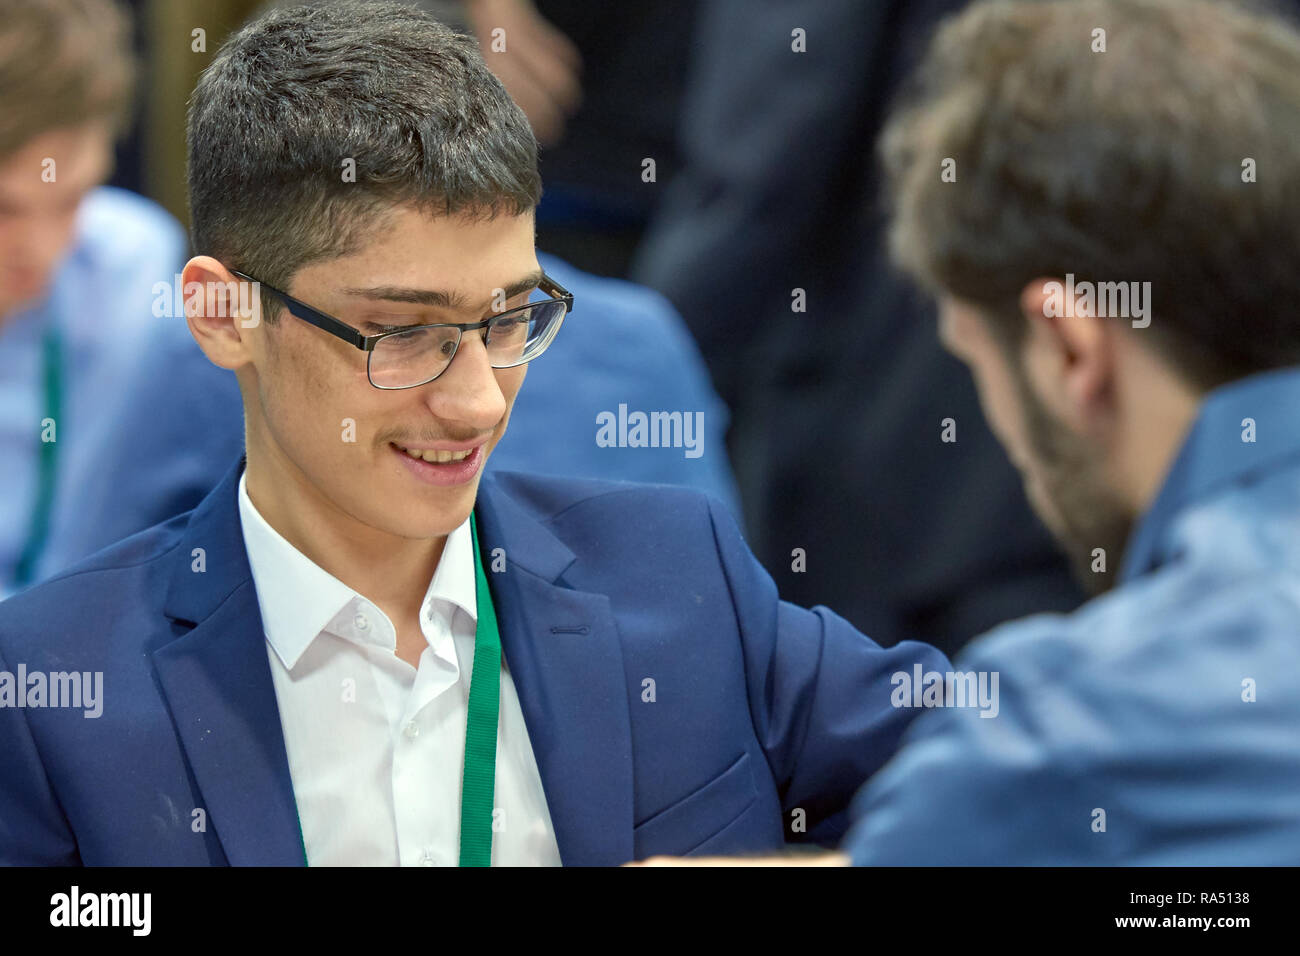 St. Petersburg, Russia - December 30, 2018: Grandmaster Daniil Dubov,  Russia holding the golden cup of World Rapid Chess Championship 2018 after  award Stock Photo - Alamy